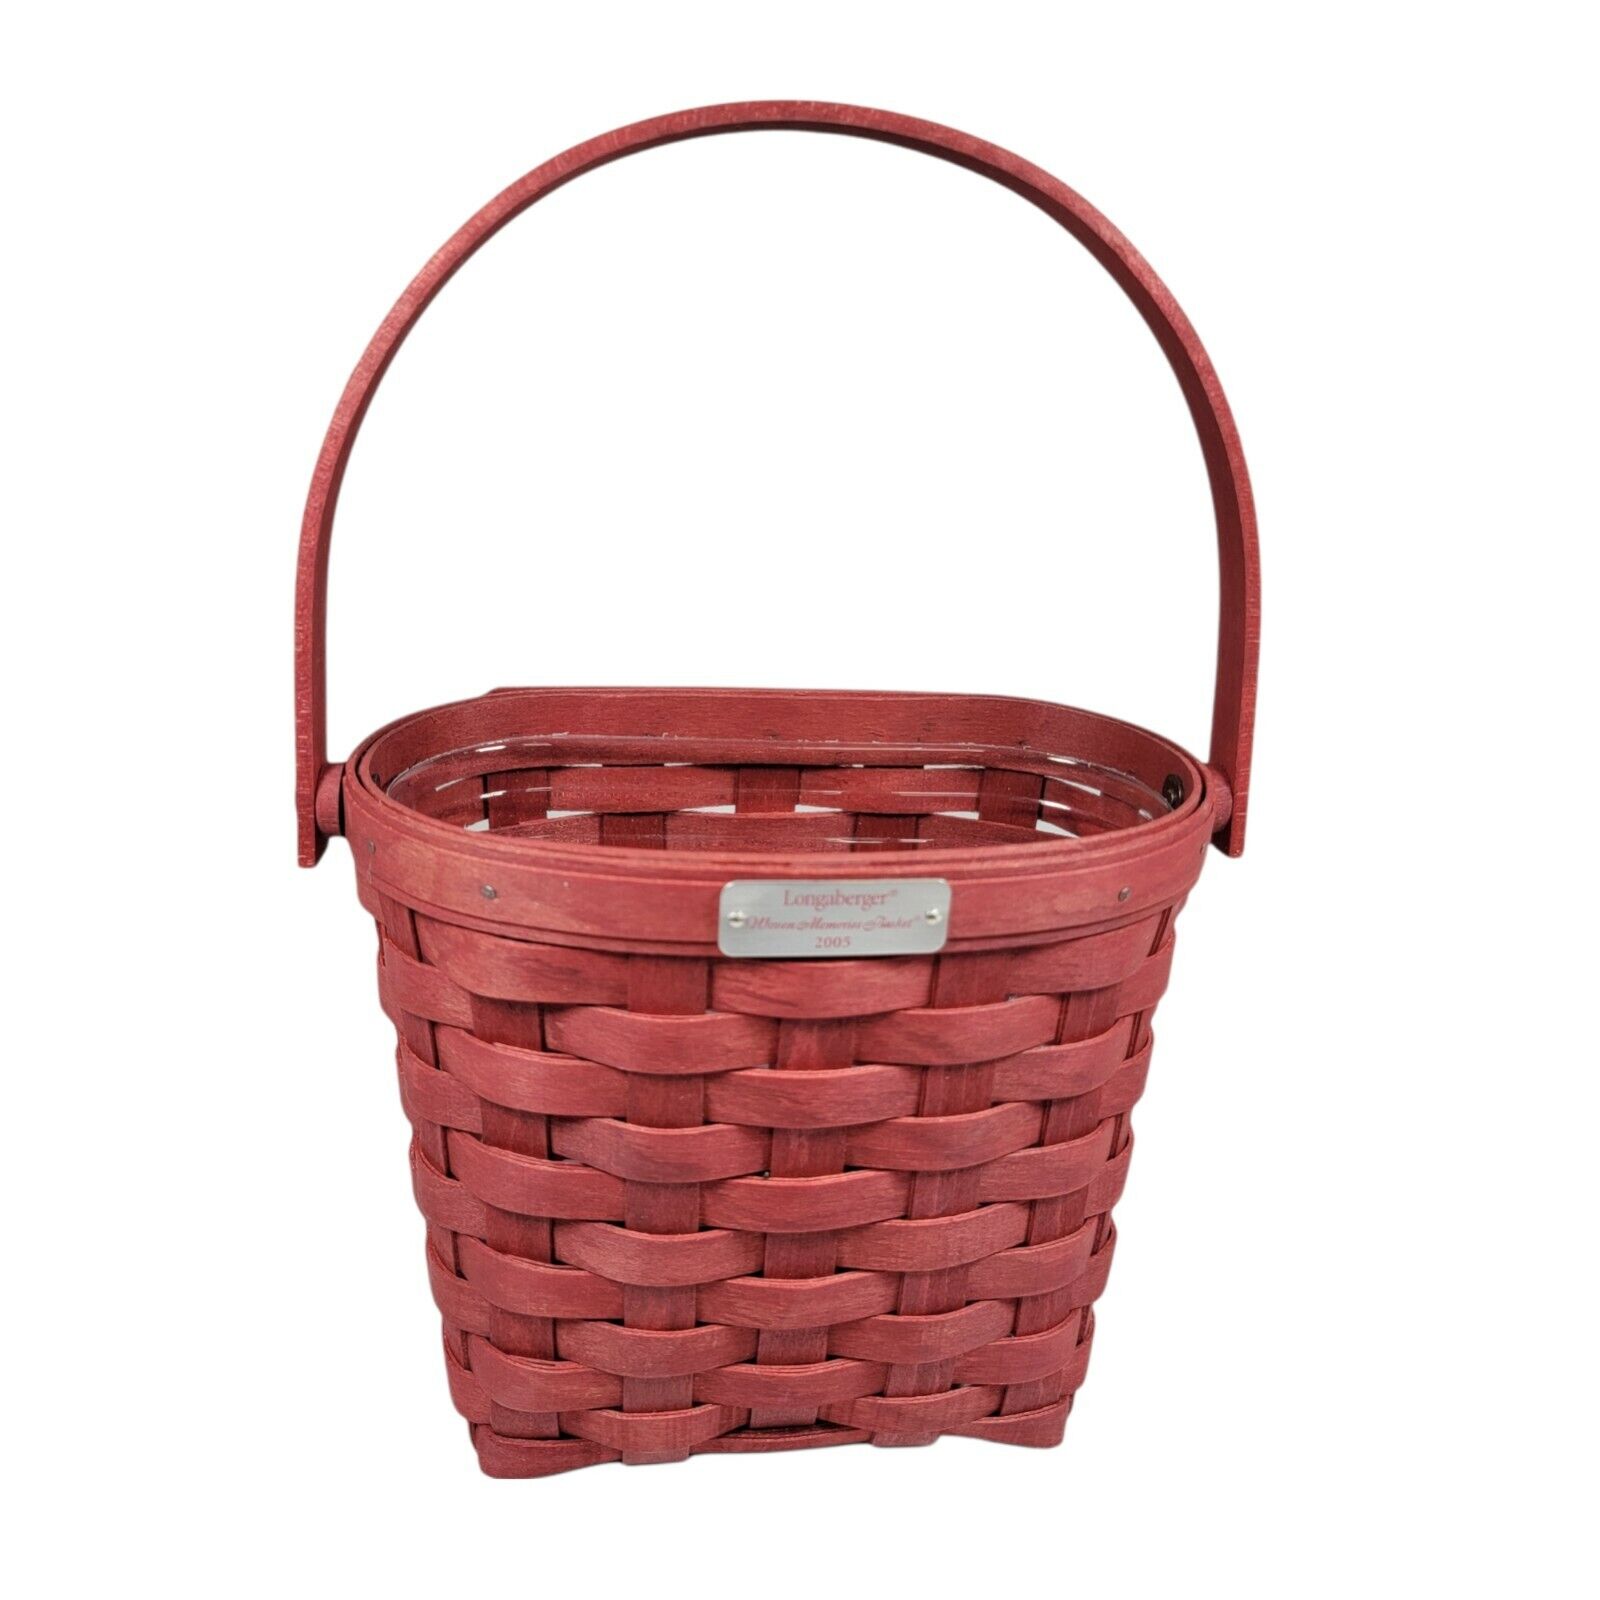 LONGABERGER RARE RETIRED 2005 BOLD RED BASKET SIGNED BY 4 FAMILY MEMBERS SILVER 